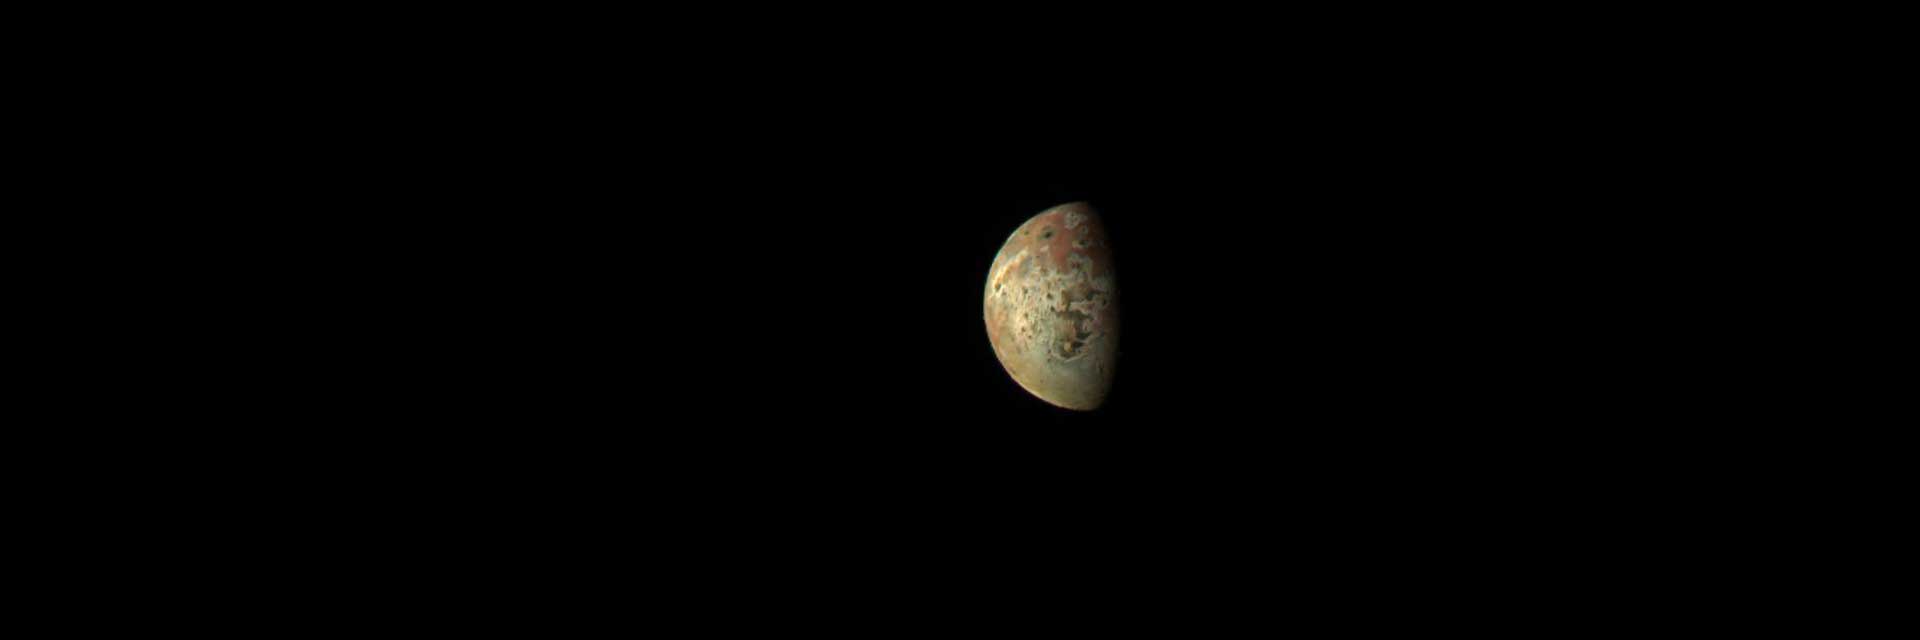 Orange and yellow moon Io is seen against the darkness of space.